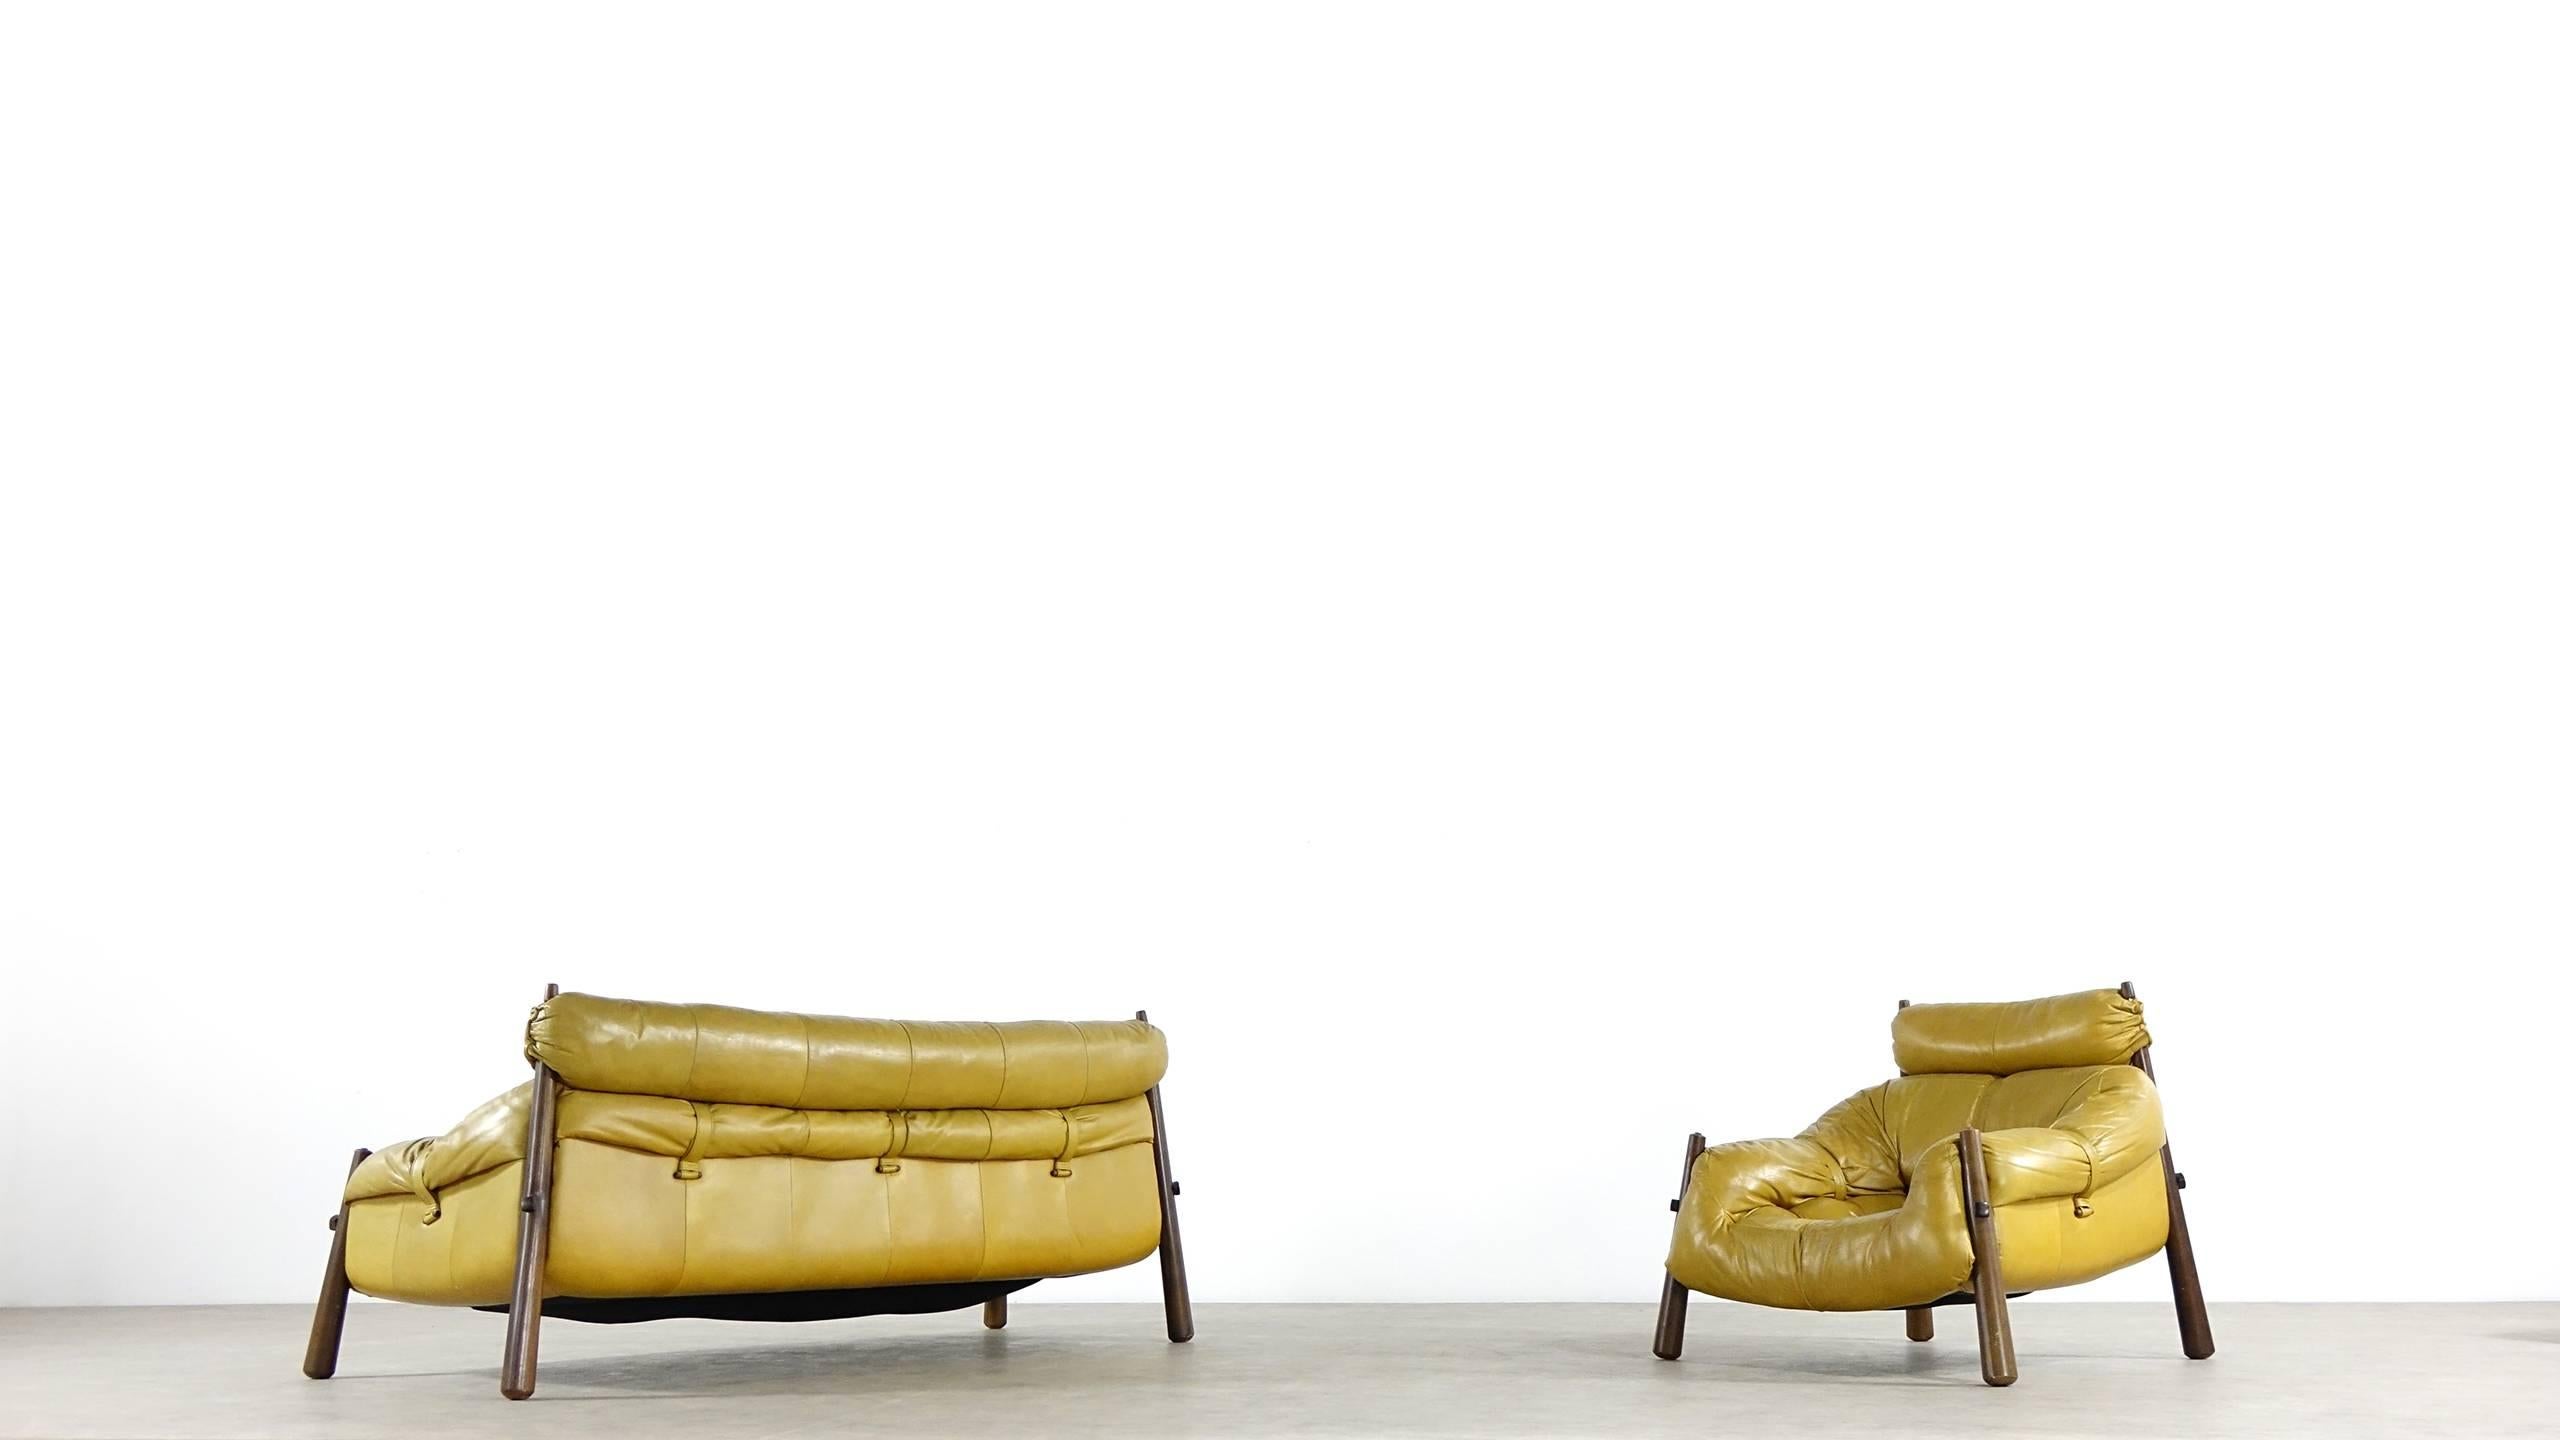 Brazilian Lounge Three-Seat Sofa by Percival Lafer for Lafer S.A. 1958 2